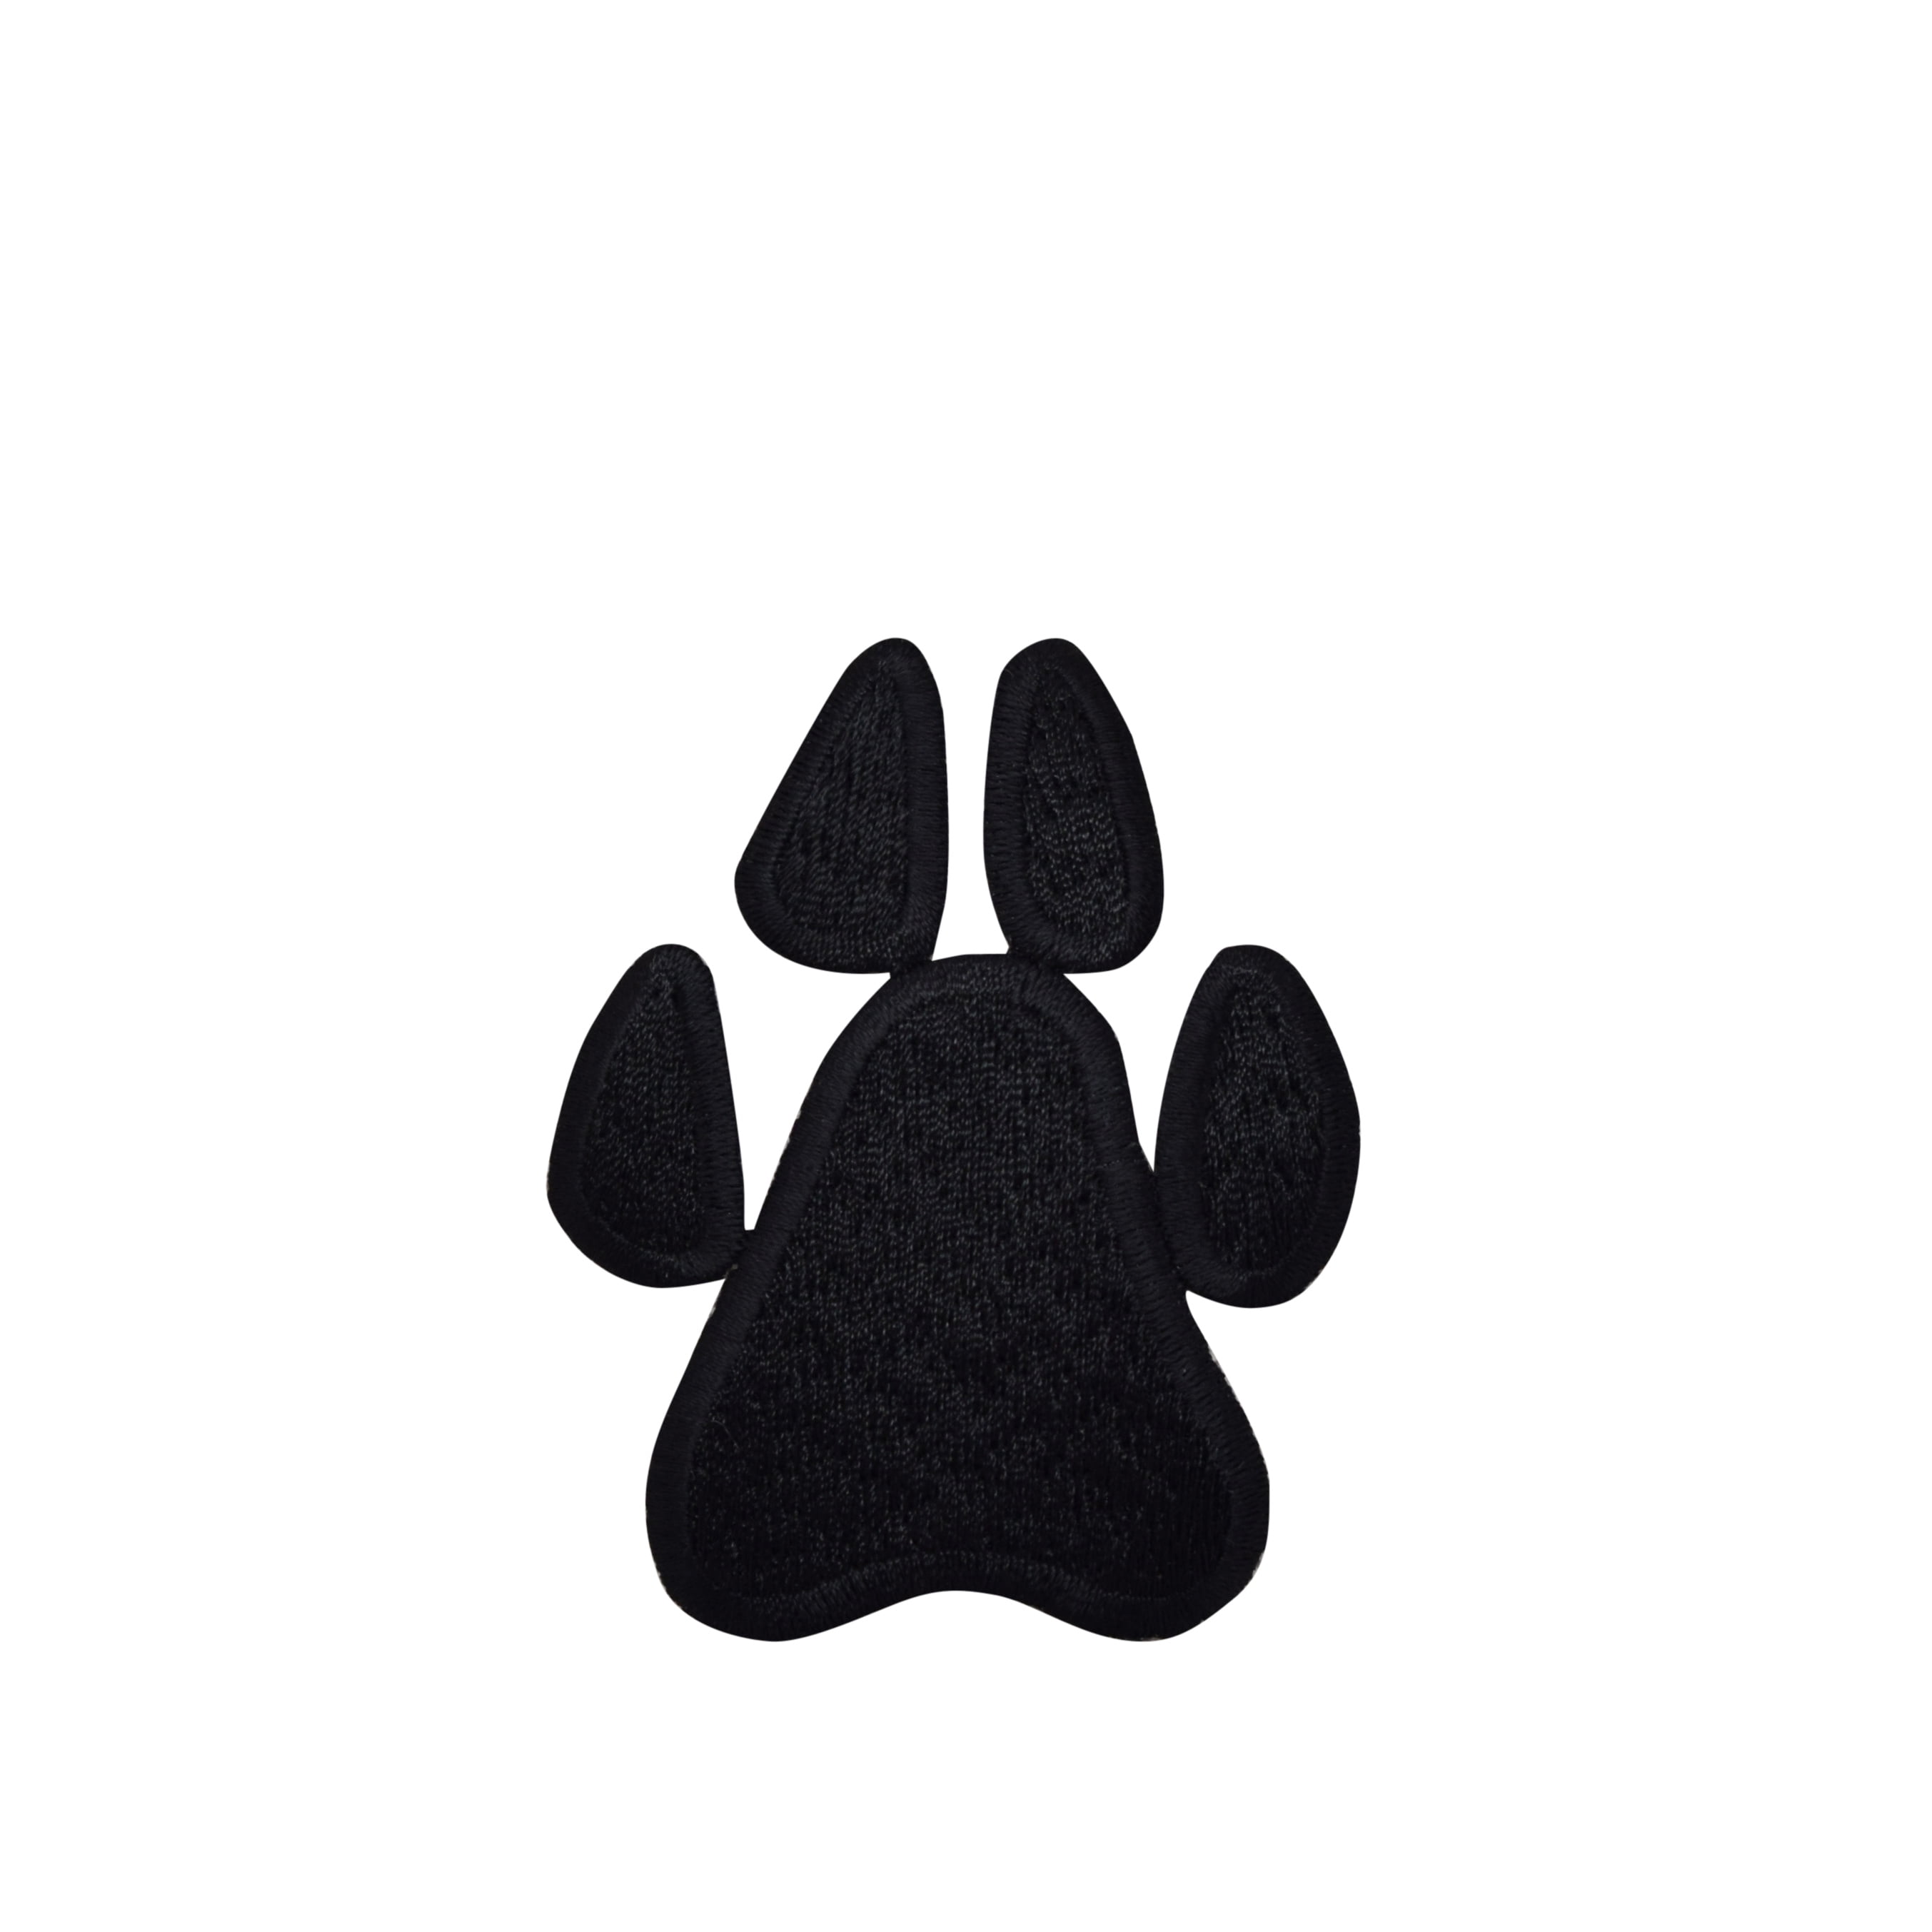 Paw Print Patch Iron Sew On Clothes Bag Embroidered Badge Embroidery Applique 